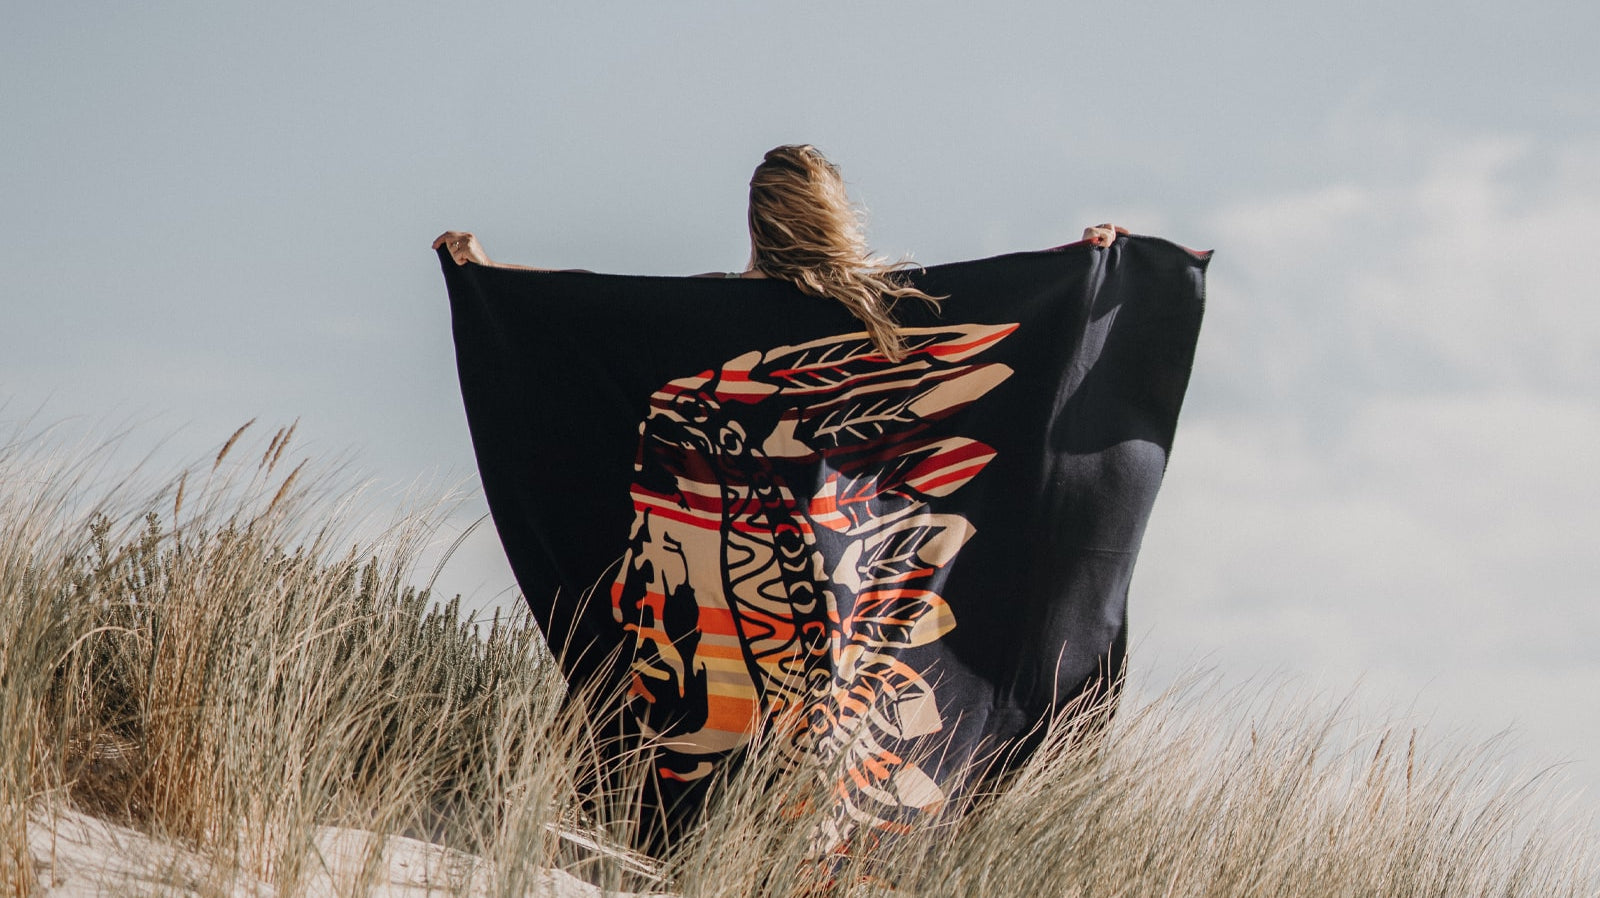 Embrace Comfort and Culture: The Chief Portrait Merino Wool Blanket